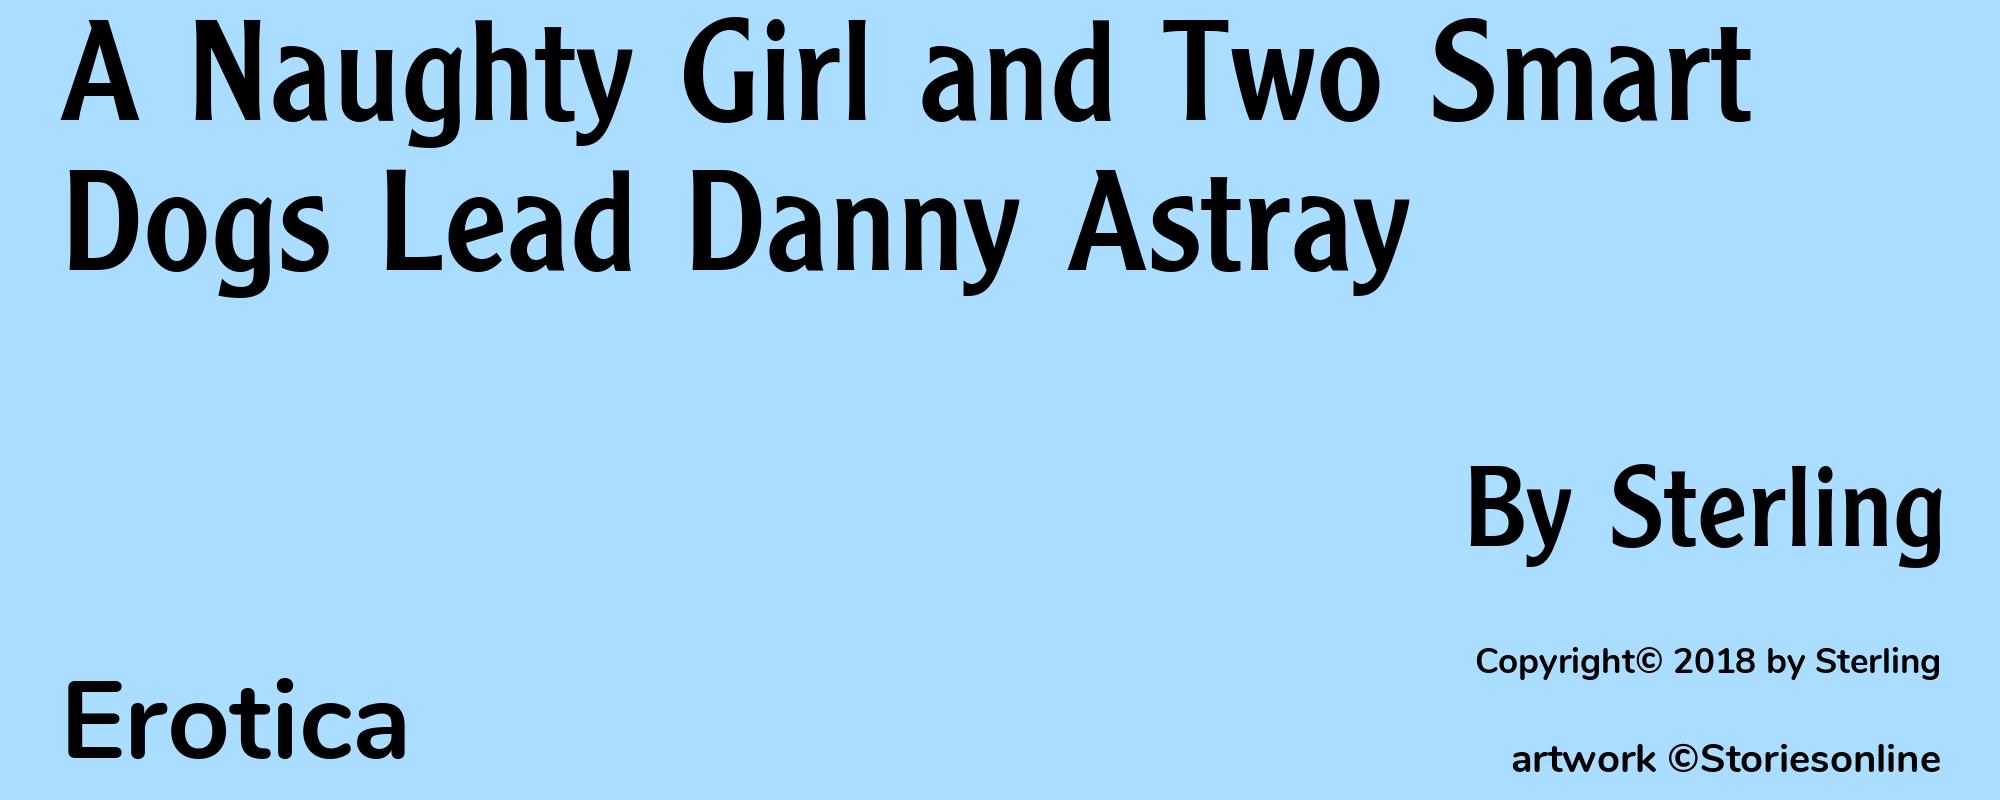 A Naughty Girl and Two Smart Dogs Lead Danny Astray - Cover